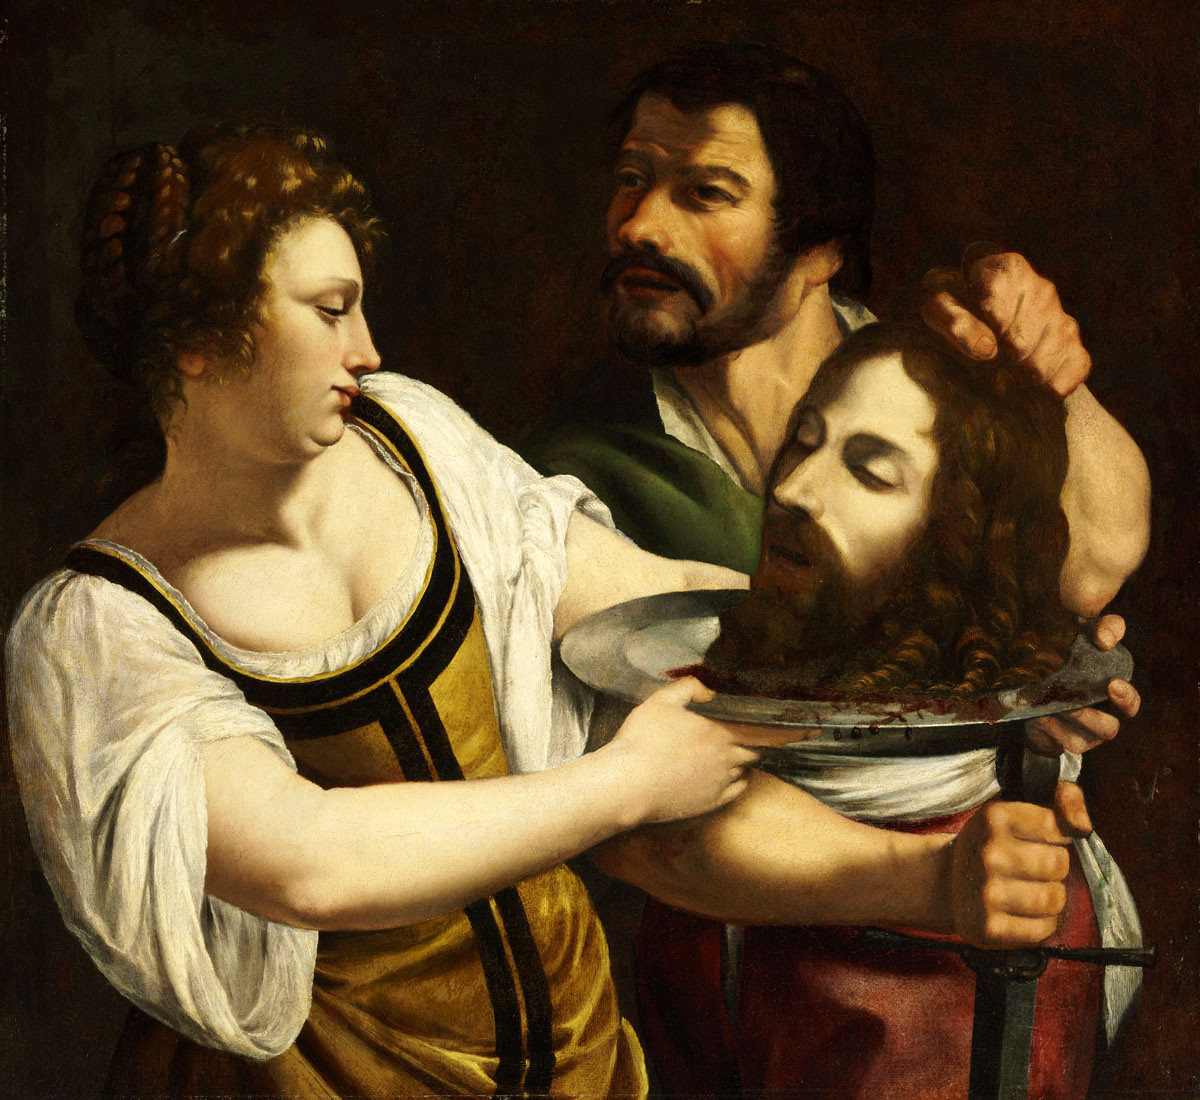 A man and a woman are in conversation. The woman holds a silver platter with the decapitated head of a bearded man on it. The man next to her grabs the head by the hair, lifting it for her to see. He holds a sword pointed down in the other hand. There is no sense of setting.